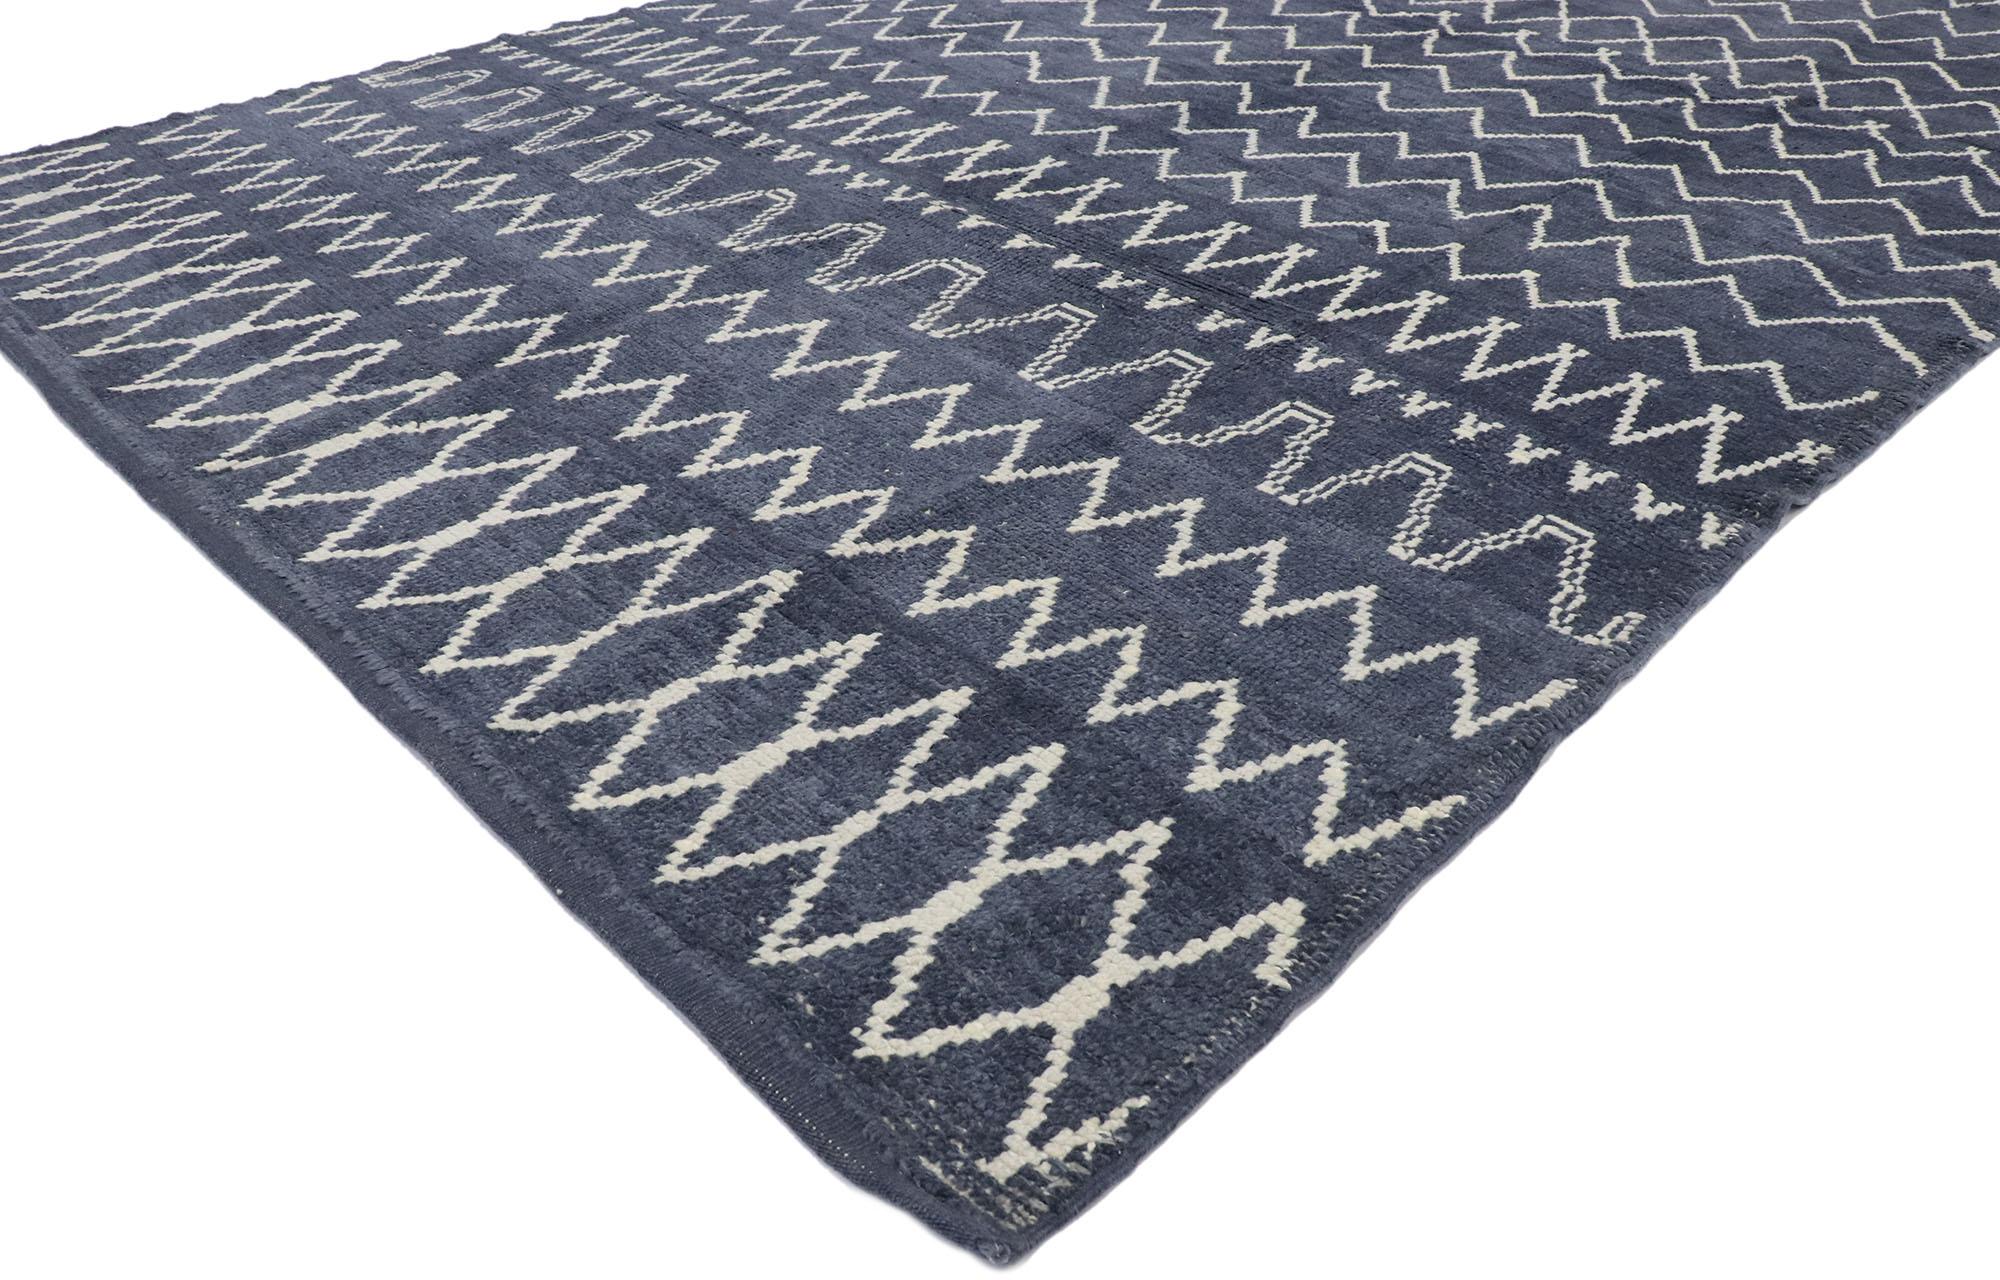 53452, new contemporary Moroccan style rug with diamond pattern and chevron design. Softer yet no less striking, this hand knotted wool contemporary Moroccan rug embodies cozy boho chic tribal style with hygge vibes. The Moroccan style rug features